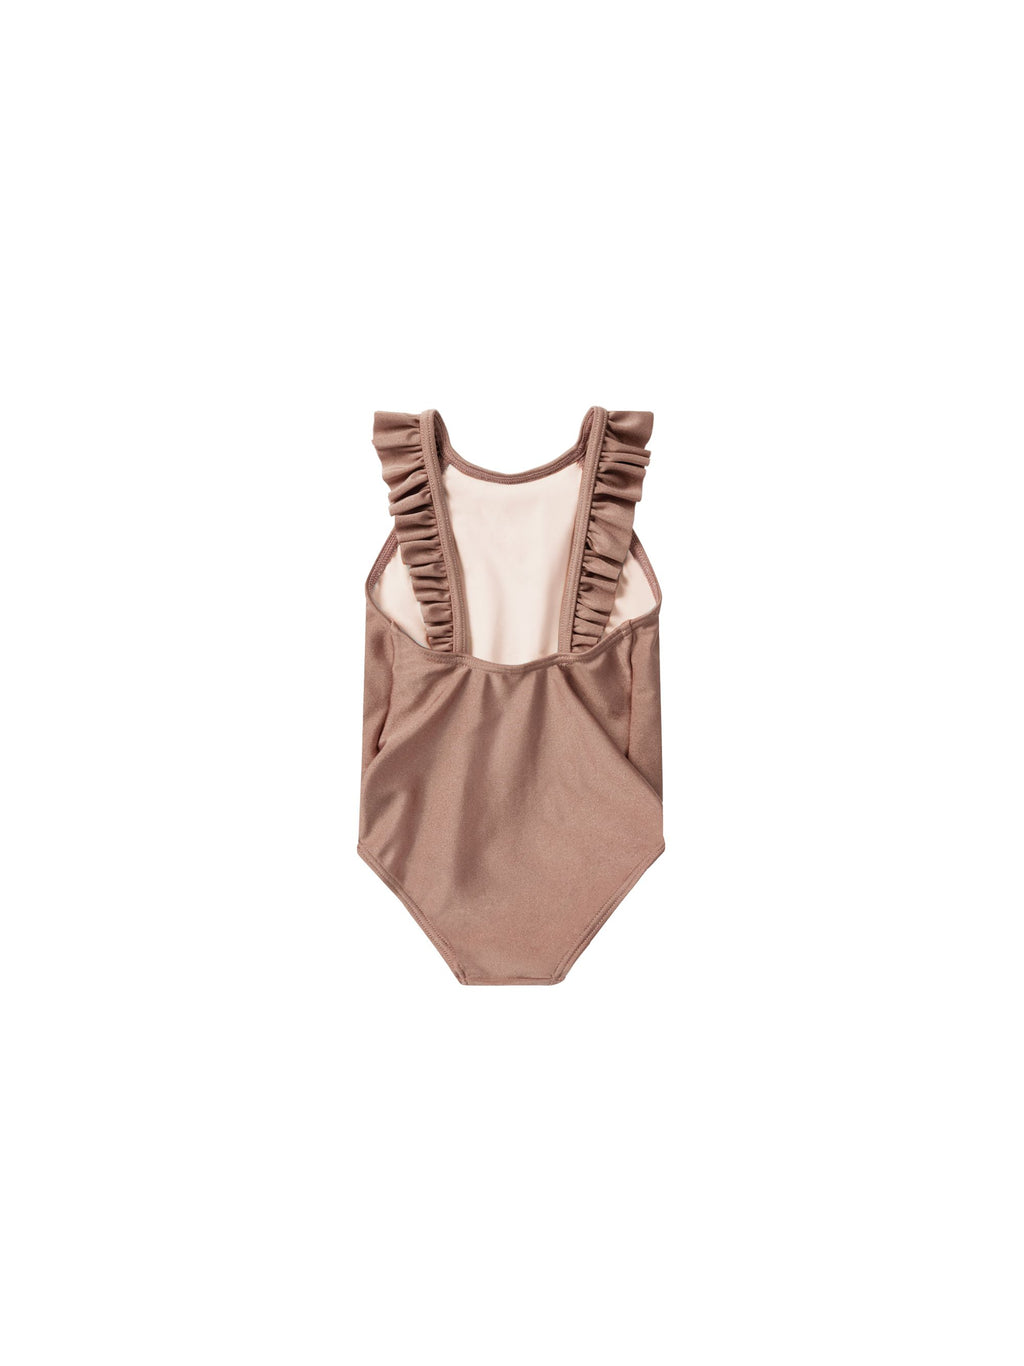 Arielle One-Piece - Mulberry Shimmer